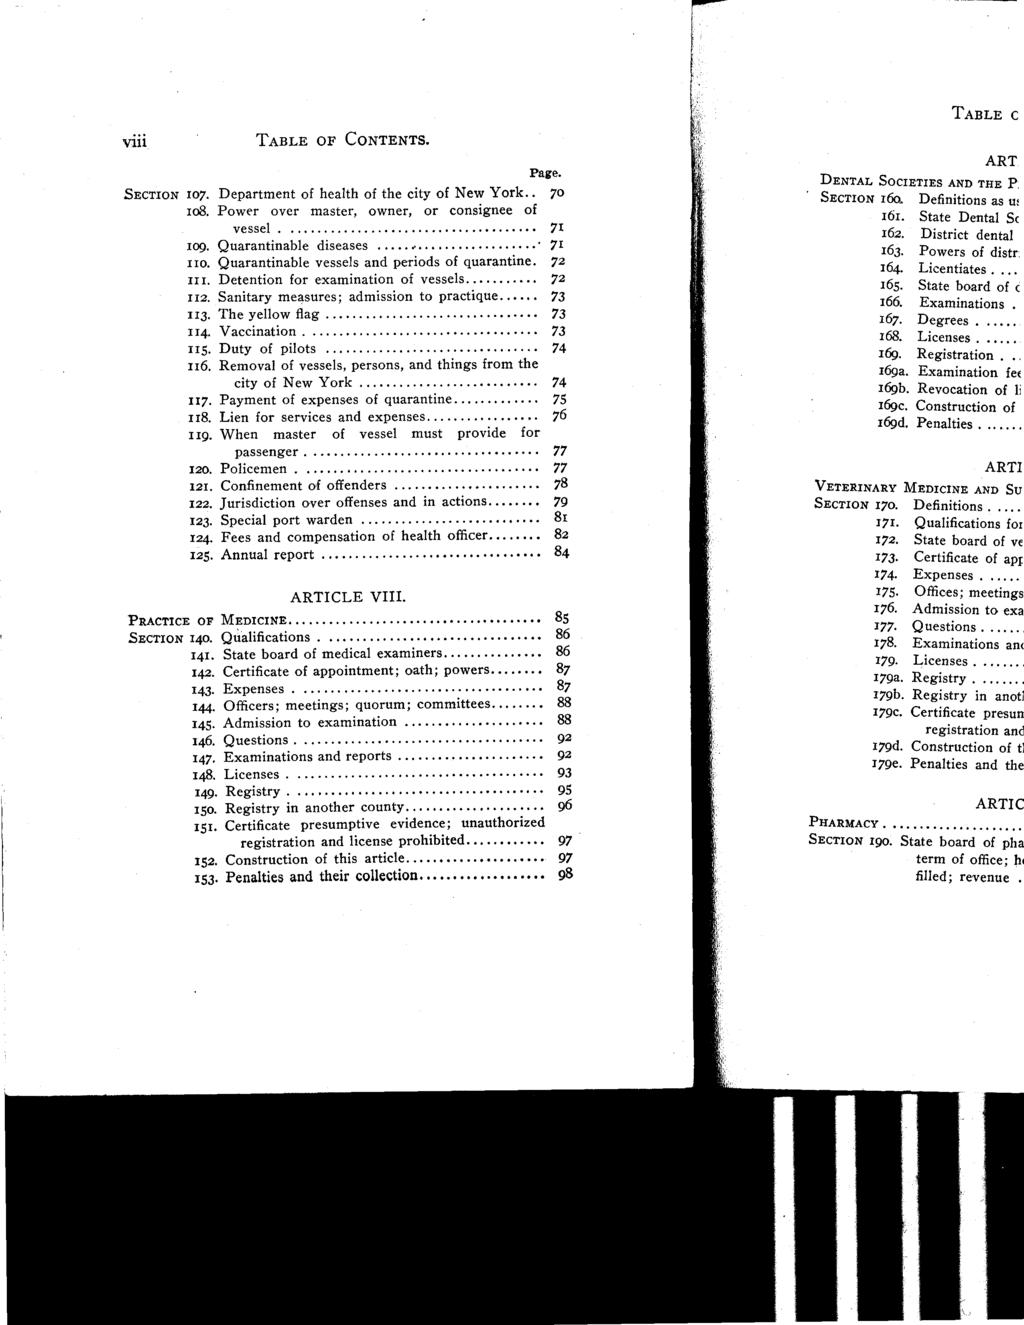 viii TABLE OF CONTENTS. Page. SECTION 107. Department of health of the city of New York.. 70 io8. Power over master, owner, or consignee of vessel 71 Io9. Quarantinable diseases 71 1io.